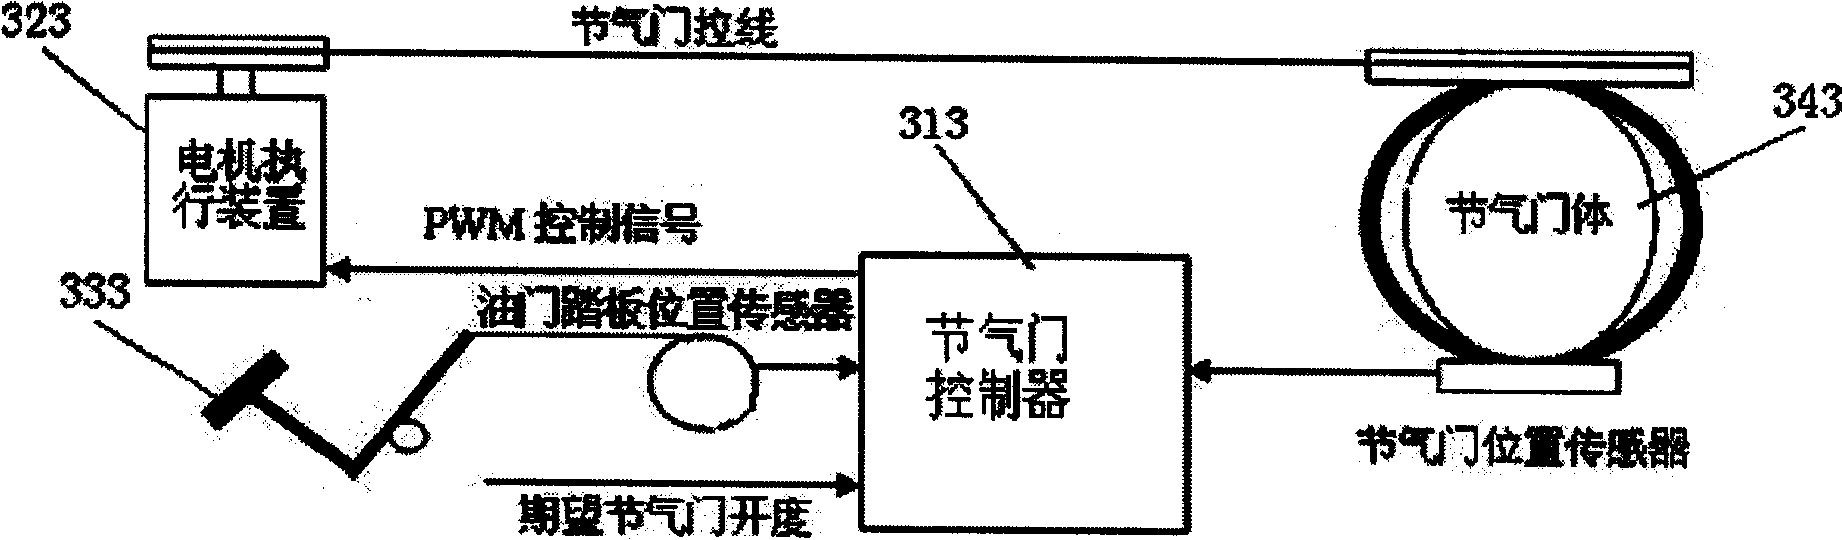 Vehicle tyre-bursting security control method and system